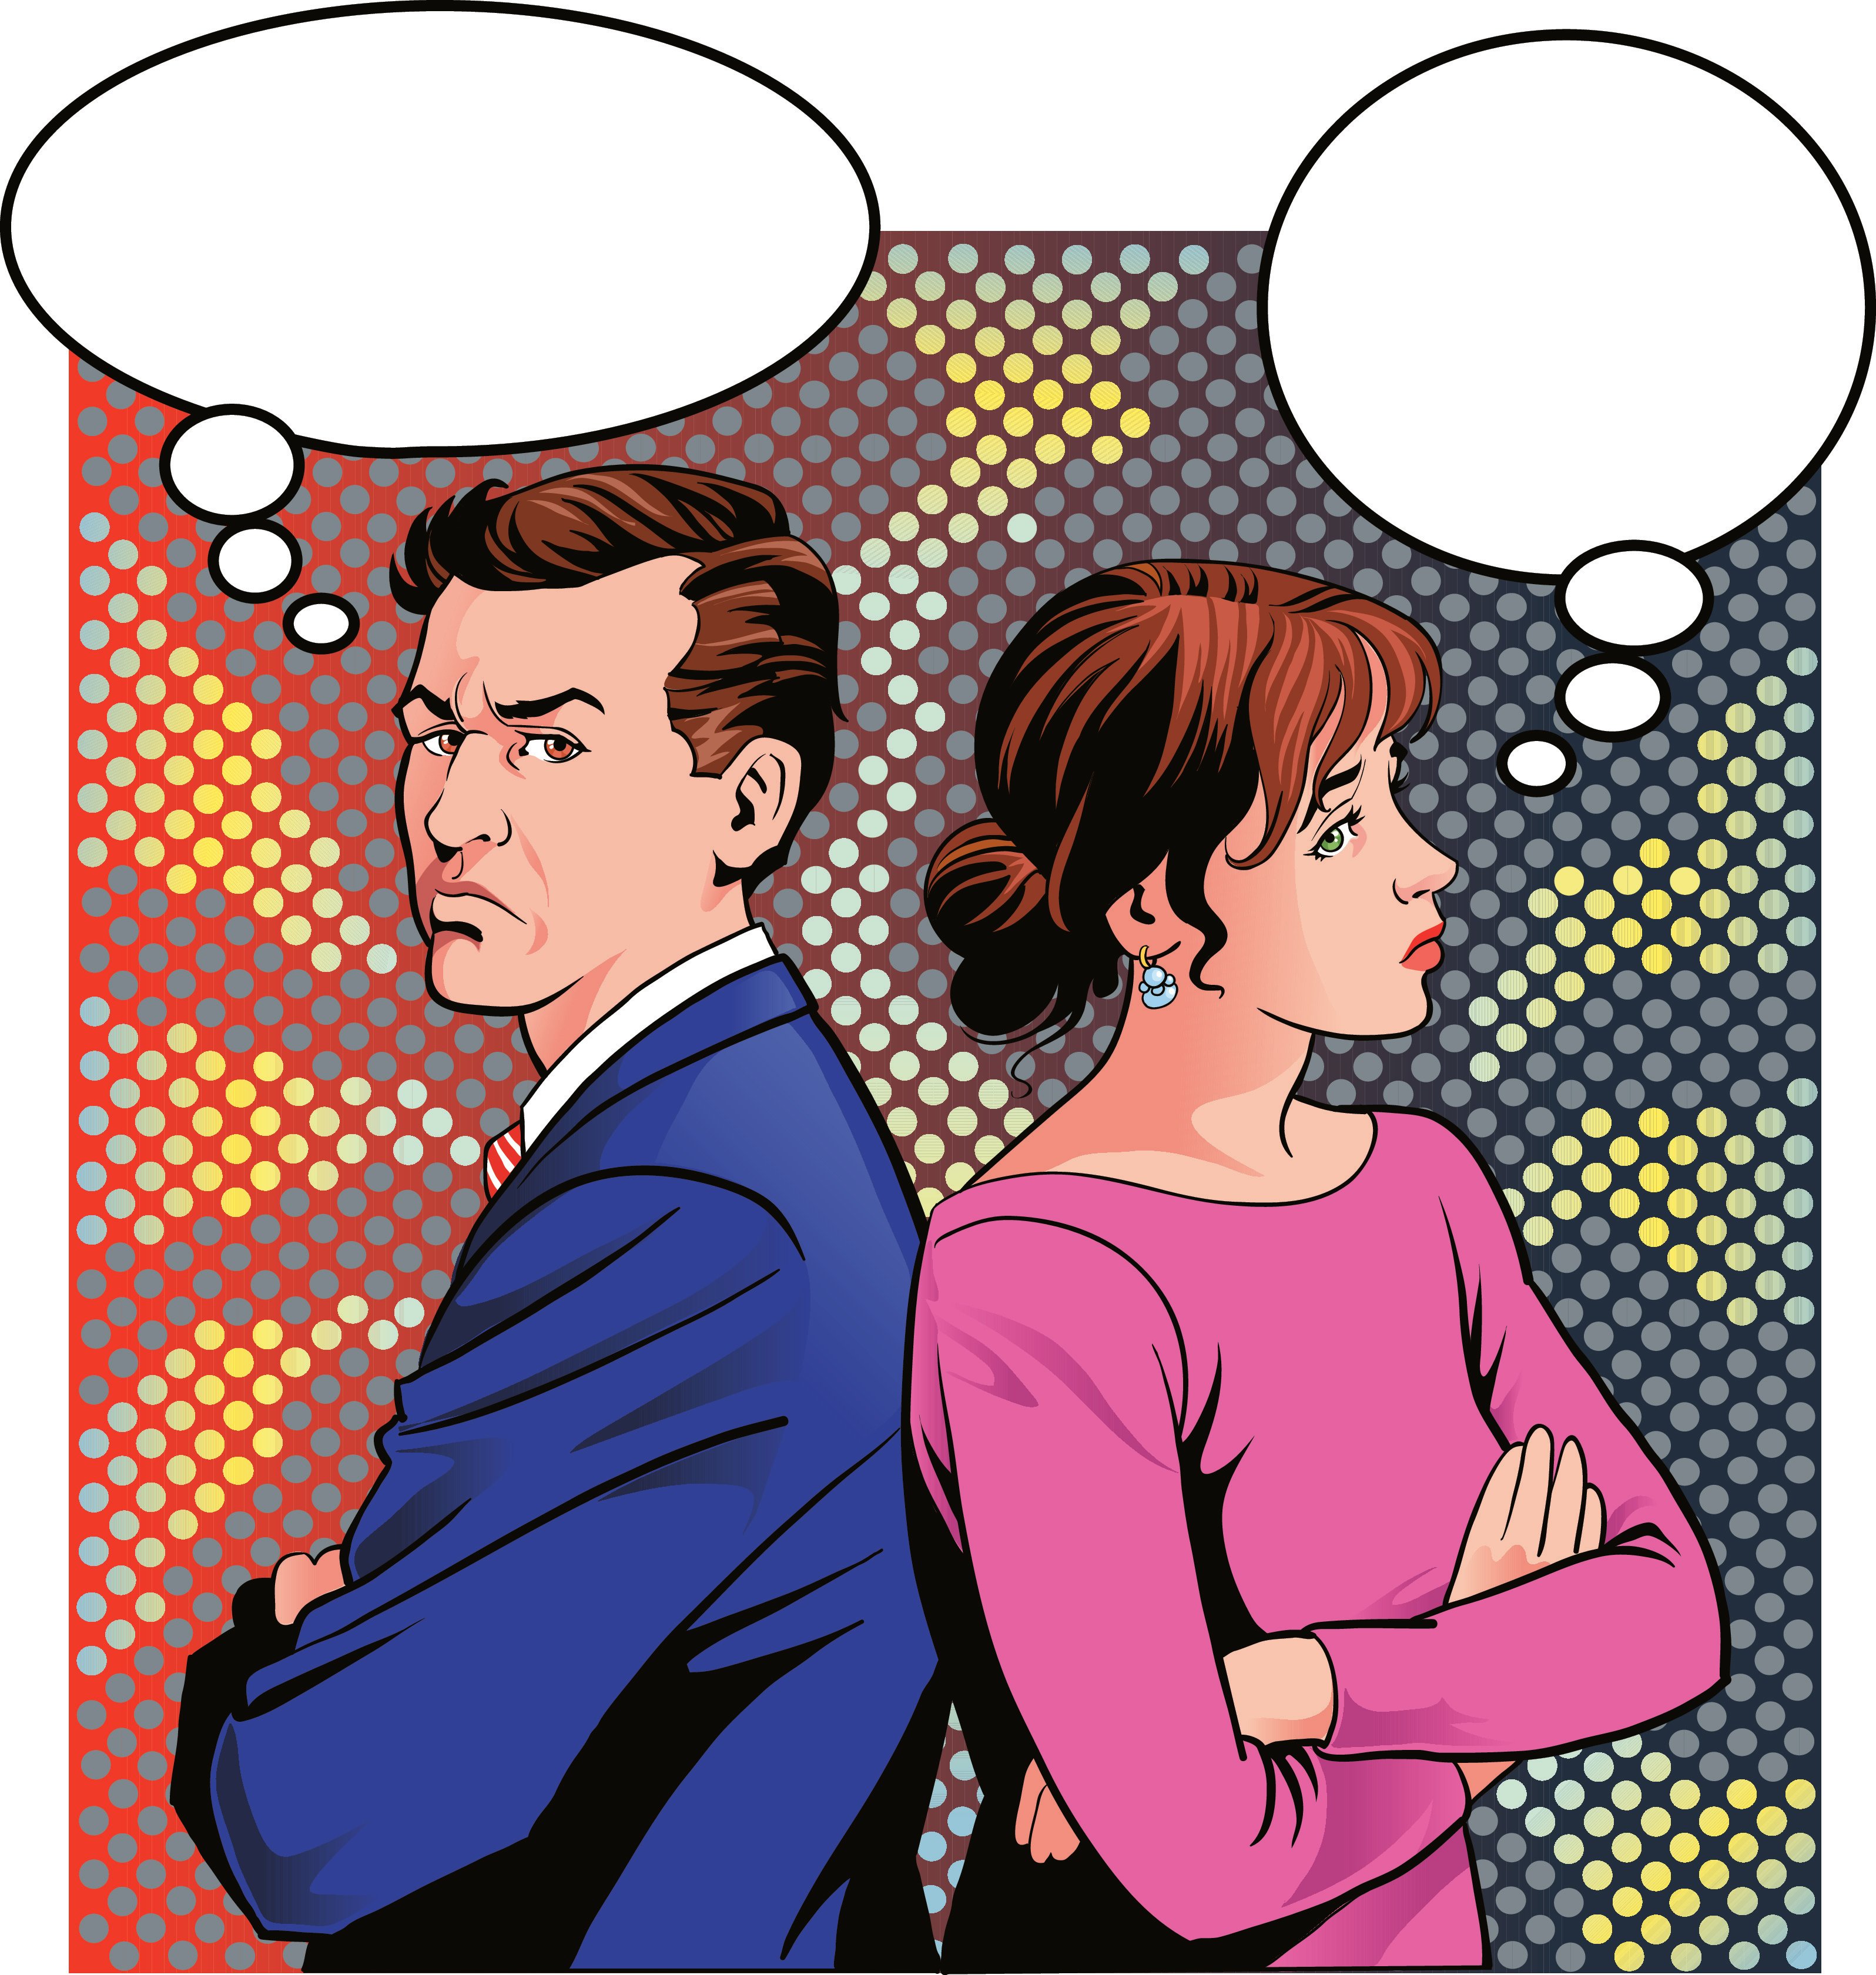 A comic-book image of an angry man and woman with empty thought bubbles